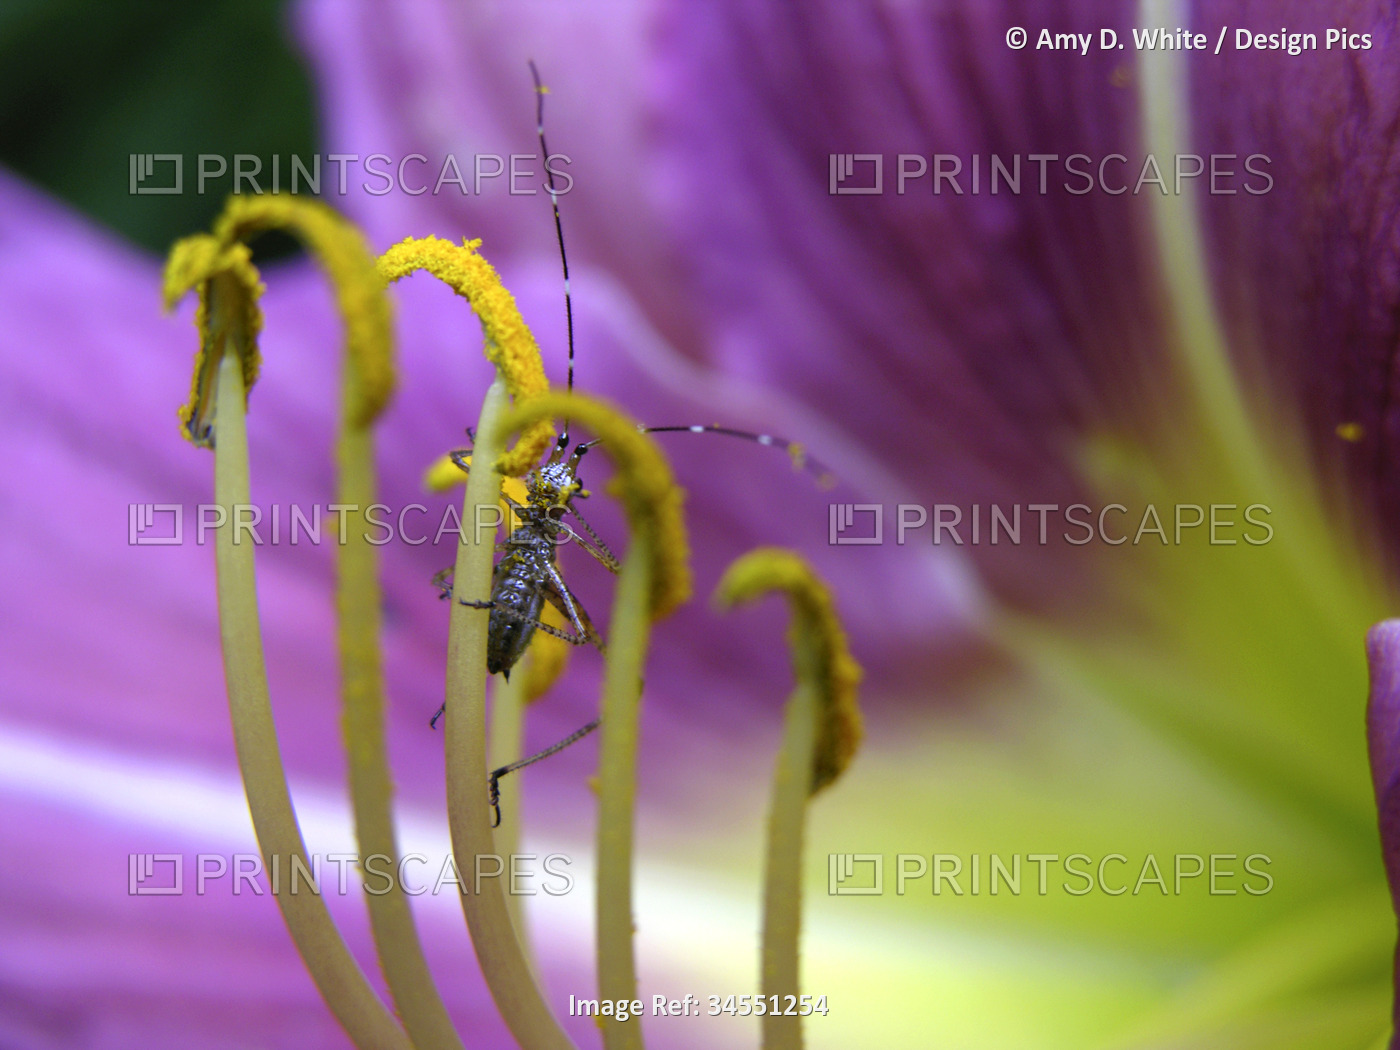 Cricket climbs up a lily flower stamen; North Carolina, United States of America